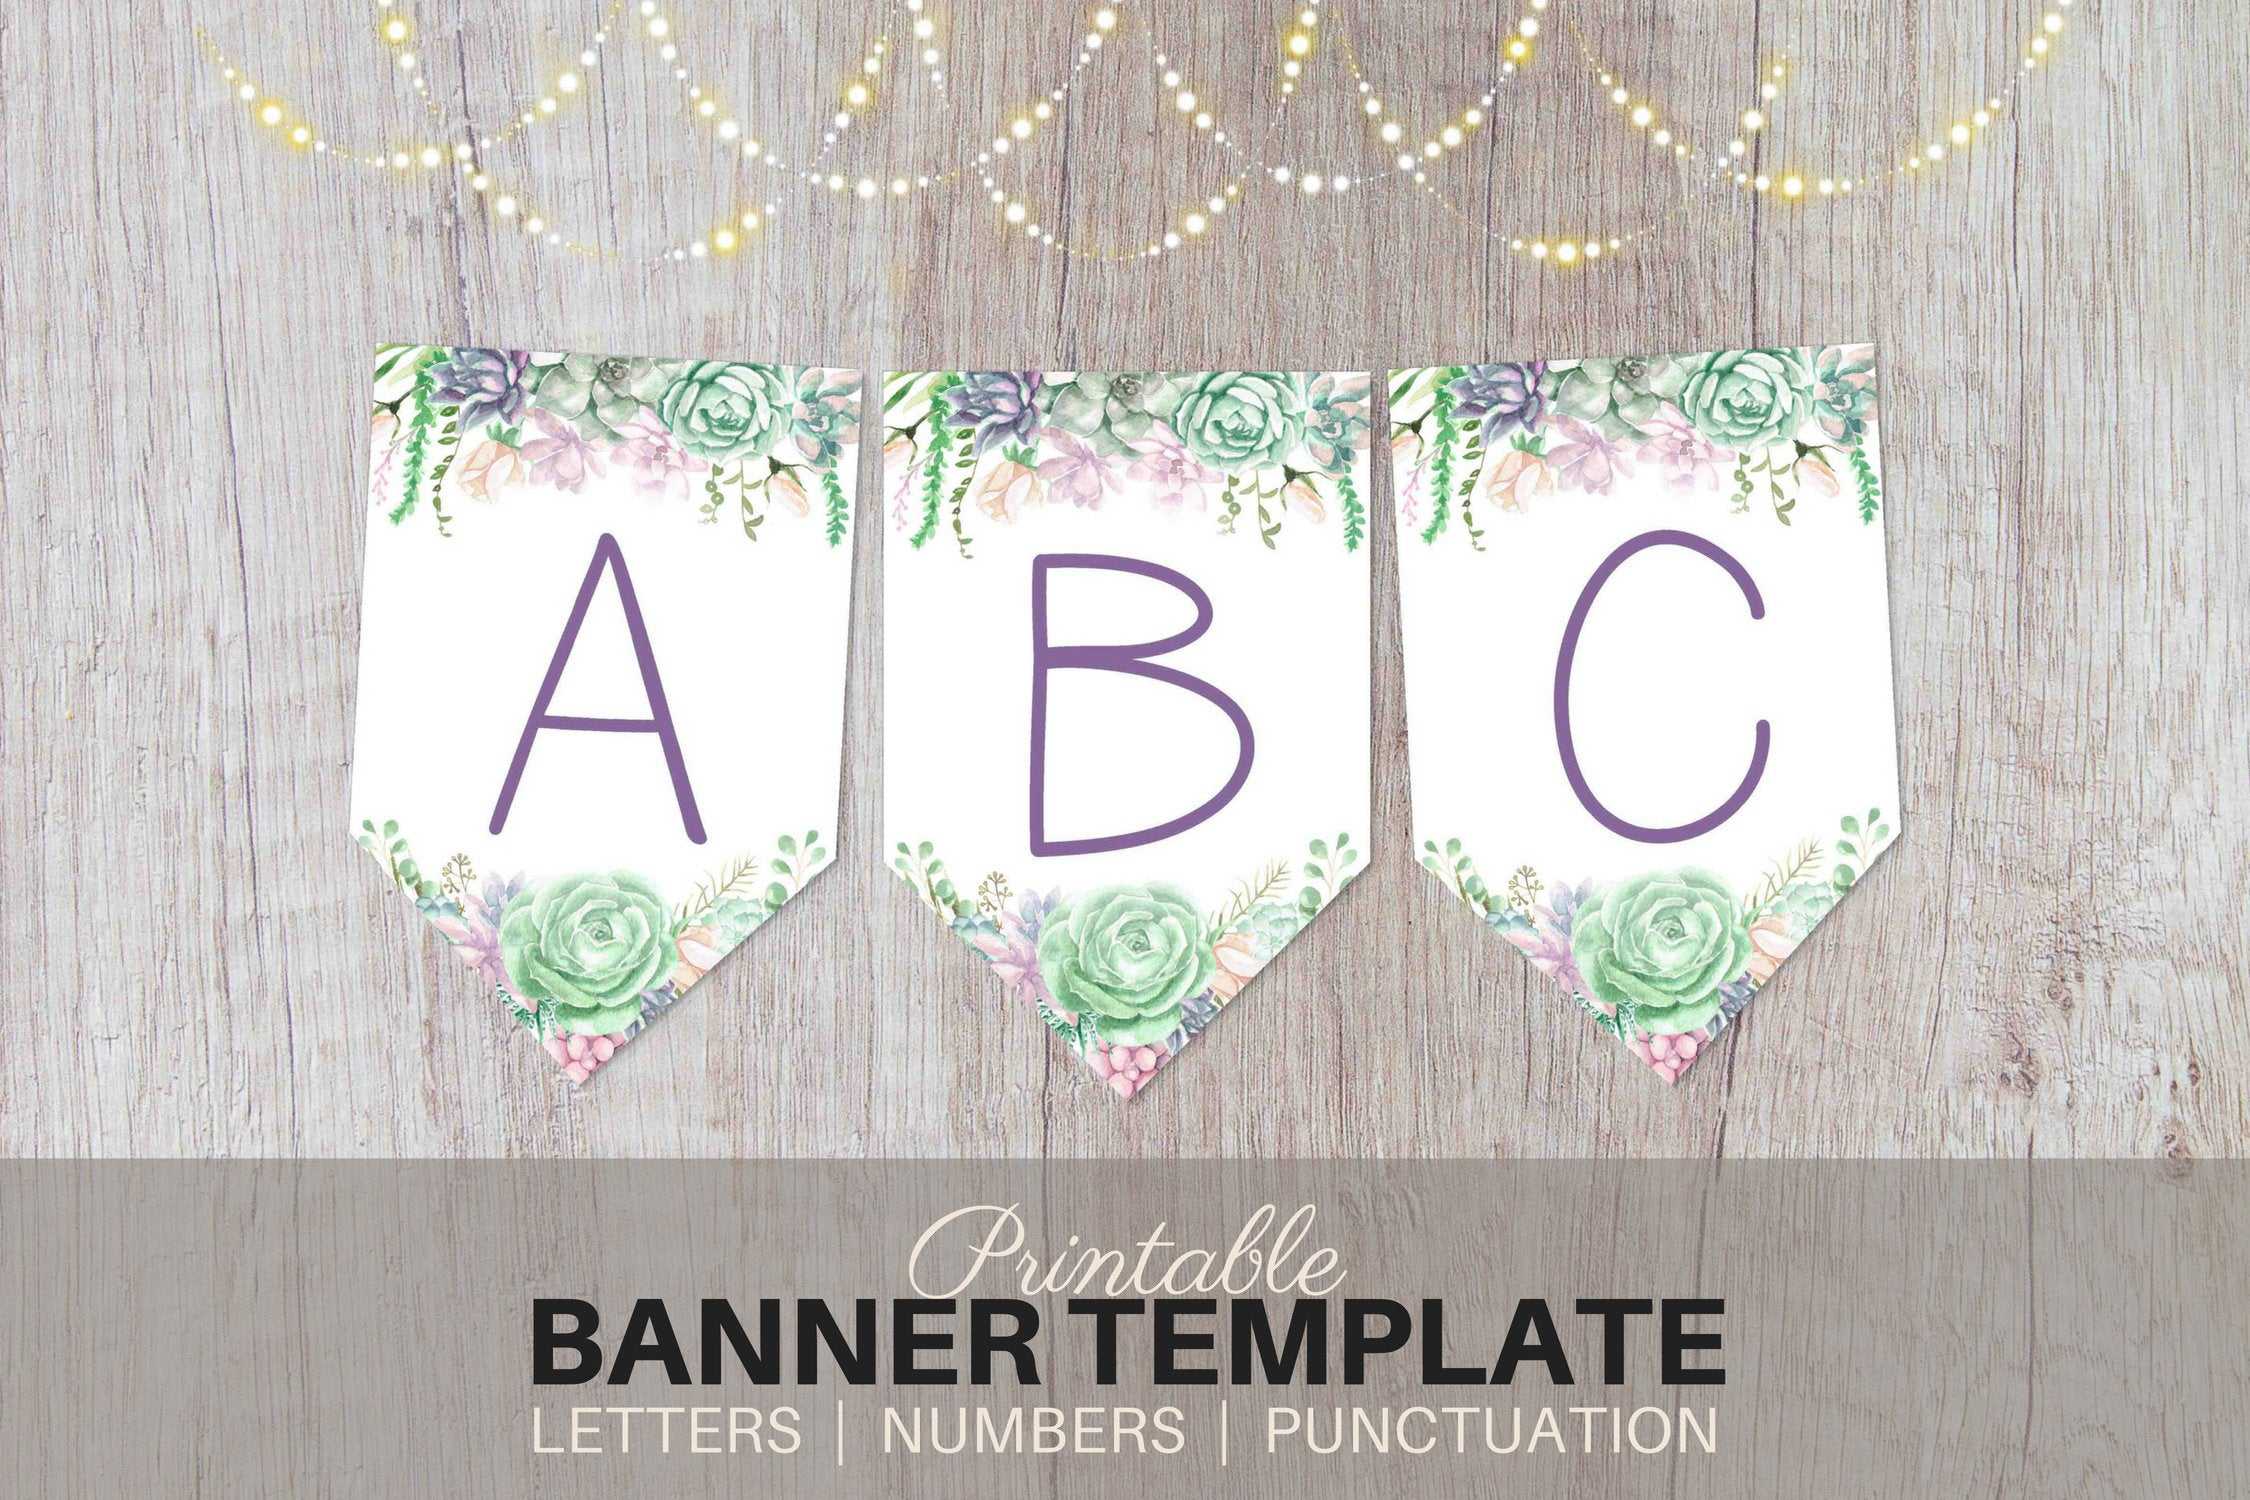 Printable Banner Template – Watercolor Succulents – Editable Printable  Banner Letters Pdf Bridal Shower, Birthday, Baby Shower, Party Banner Regarding Bridal Shower Banner Template